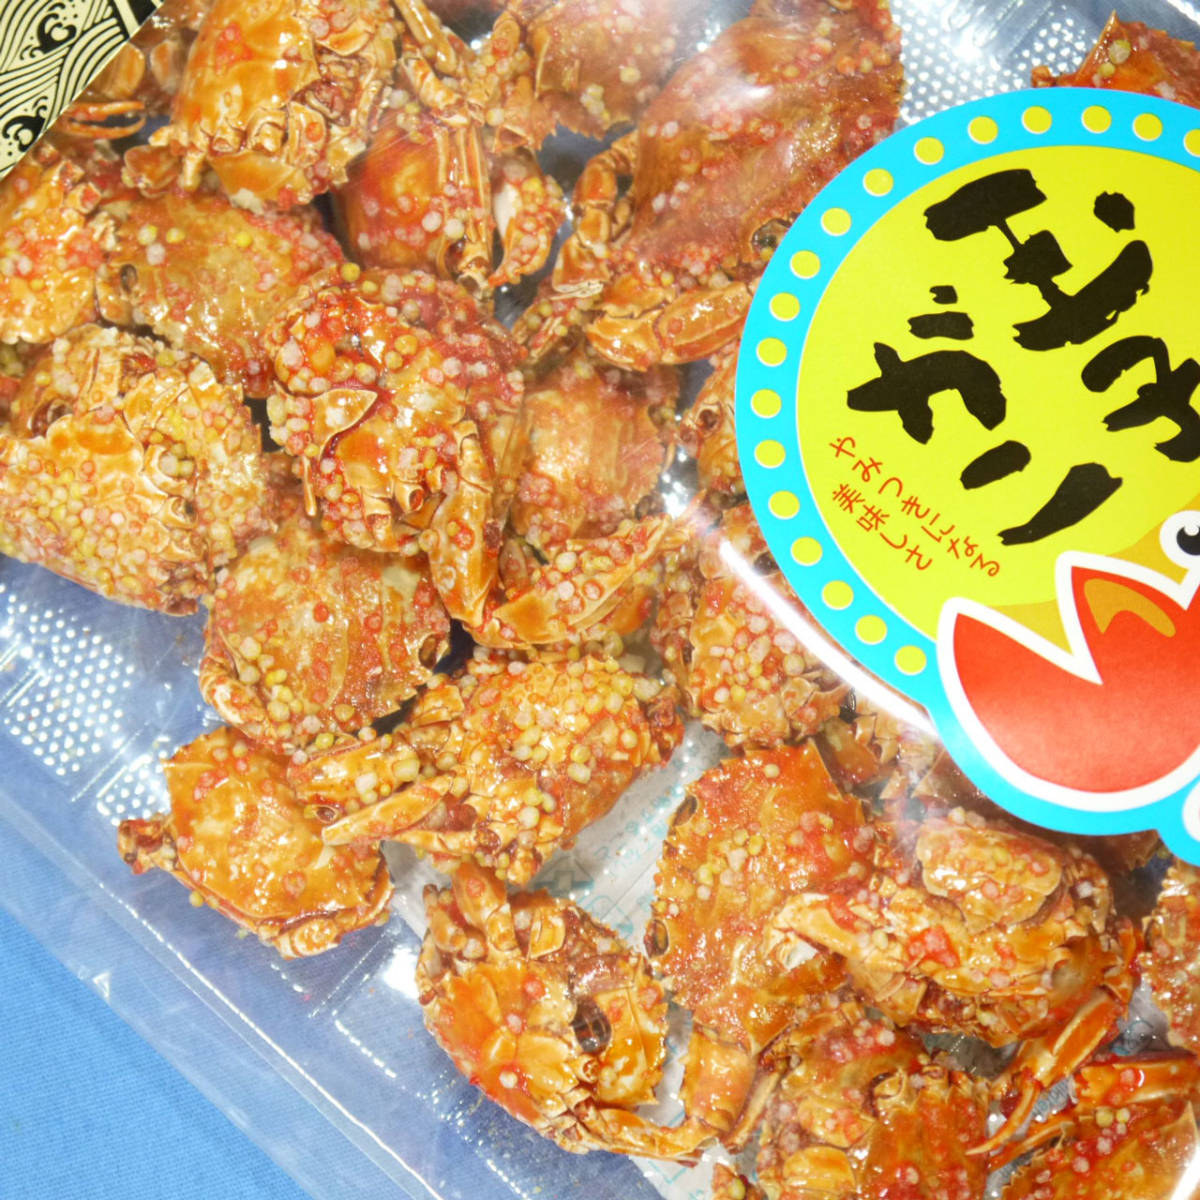  sphere . crab (. summarize 100g×5p) unusual . snack, bite .! delicacy . is this! delicacy Club, small fish delicacy,. fish delicacy [ including carriage ]